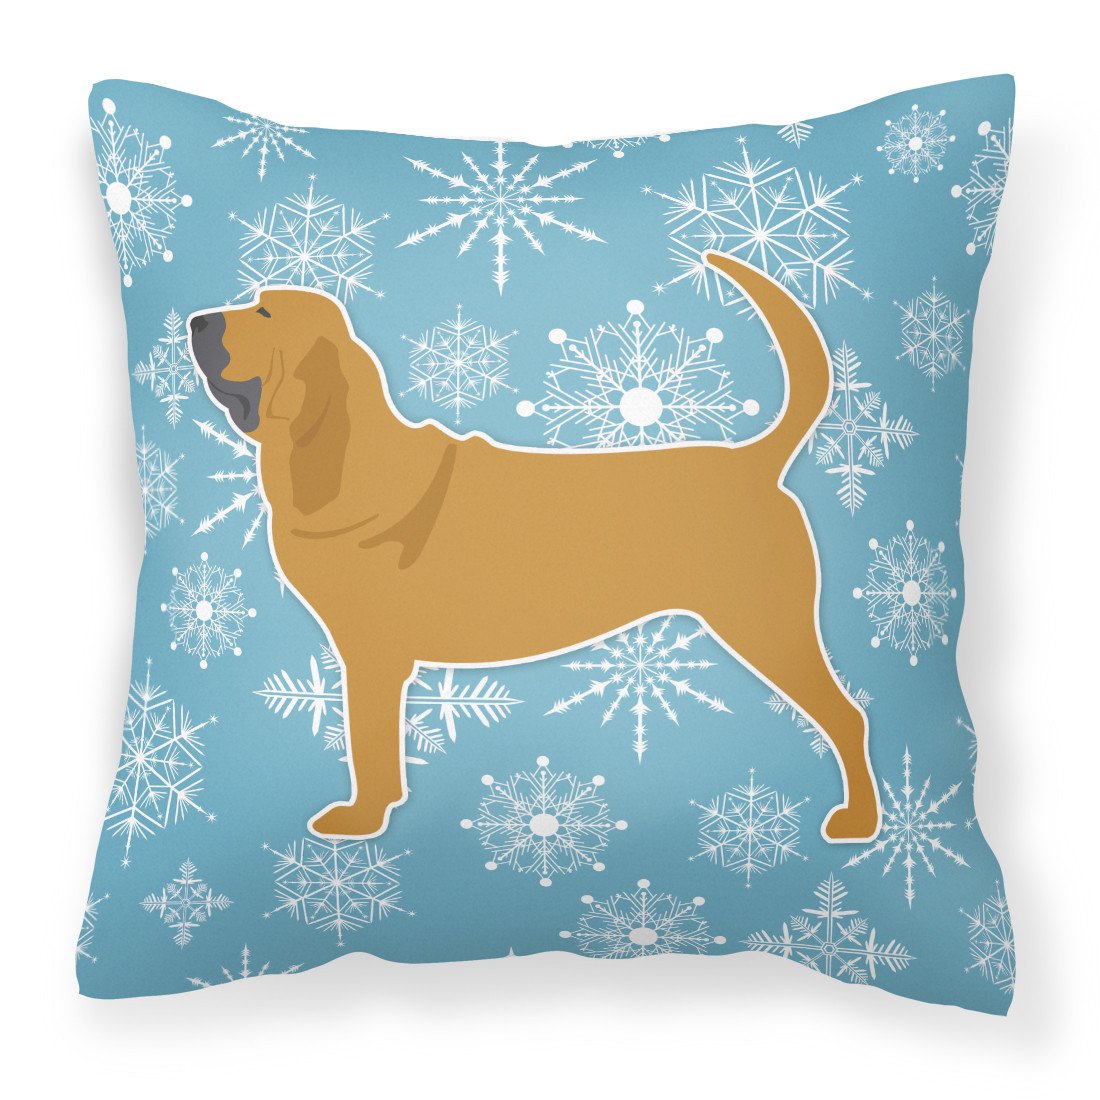 Winter Snowflake Bloodhound Fabric Decorative Pillow BB3484PW1818 by Caroline's Treasures